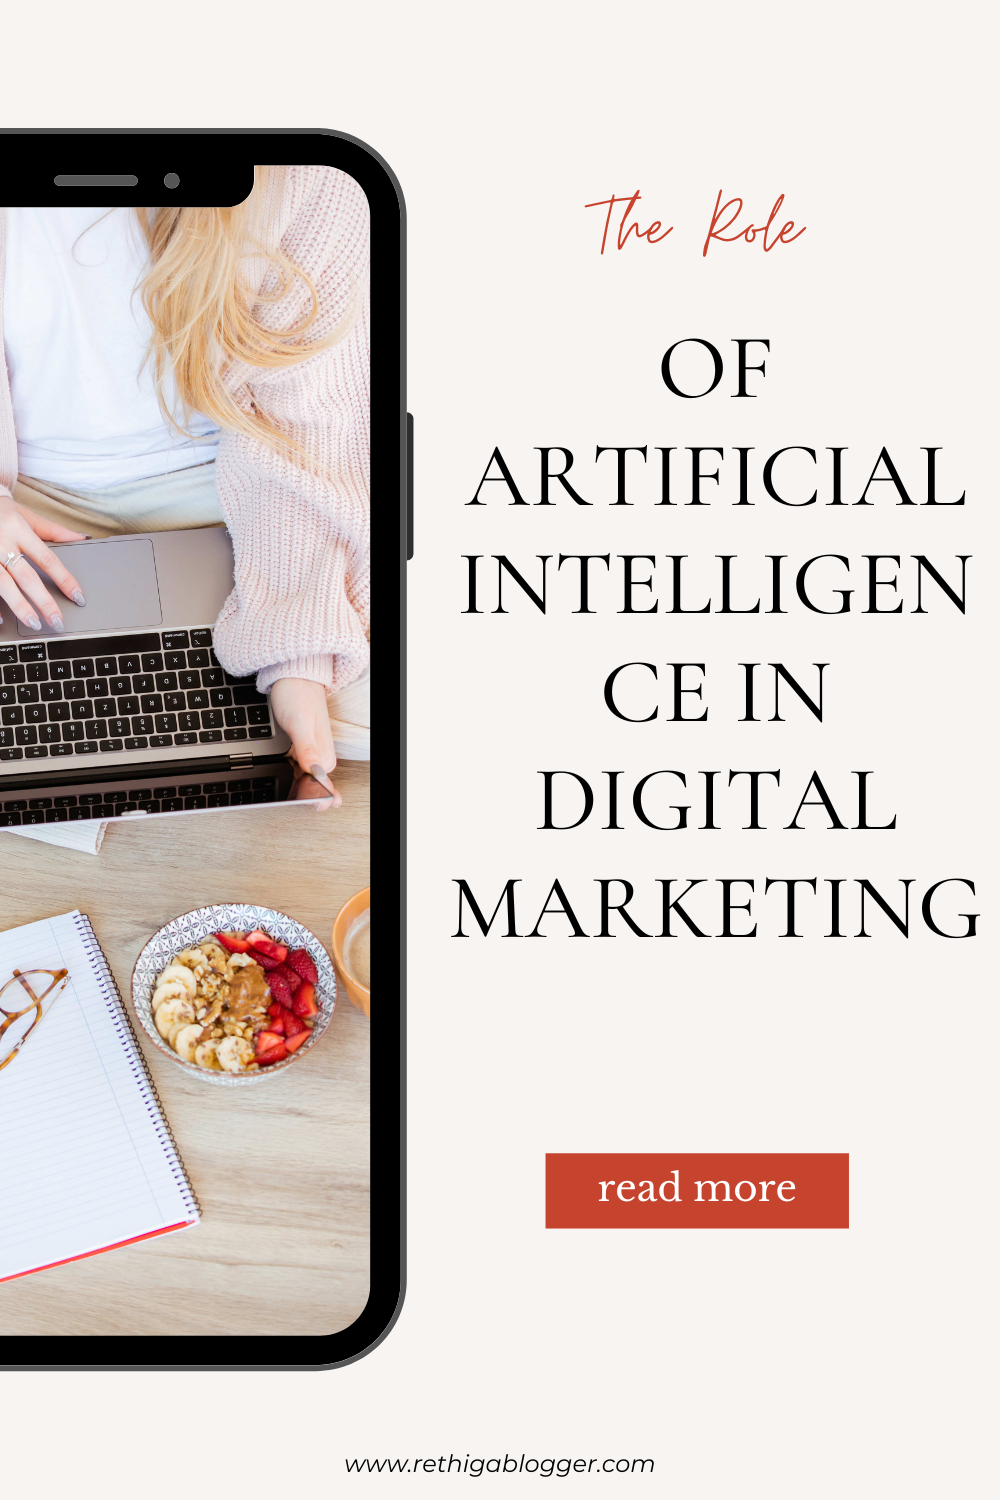 The Role of Artificial Intelligence in Digital Marketing